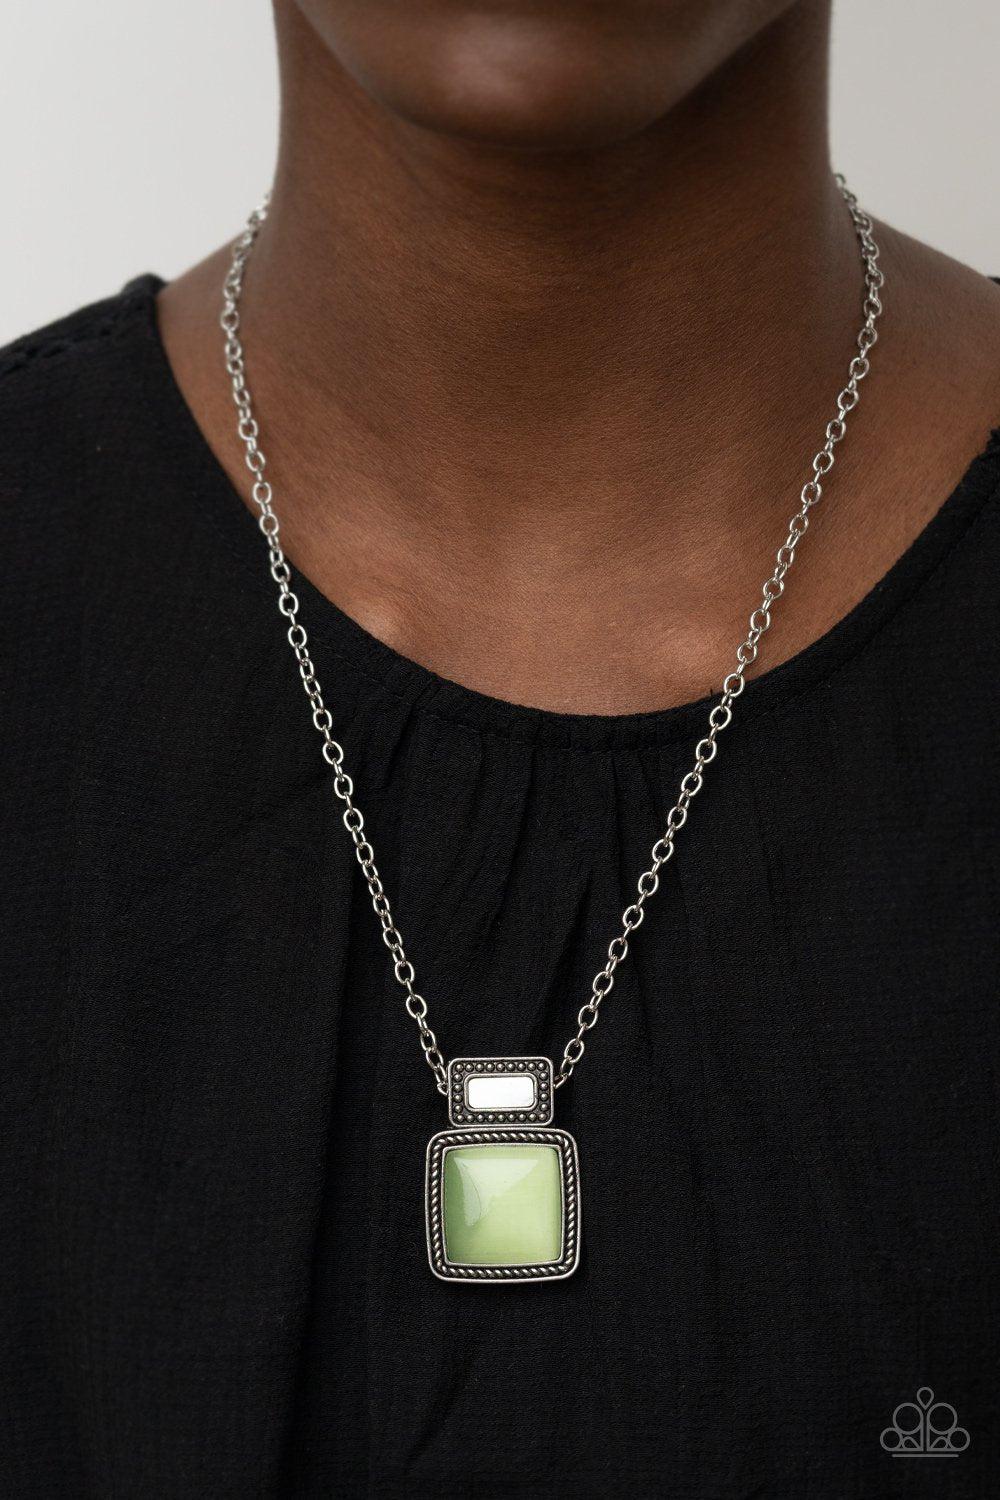 Ethereally Elemental Green Cat's Eye Stone Necklace - Paparazzi Accessories- lightbox - CarasShop.com - $5 Jewelry by Cara Jewels